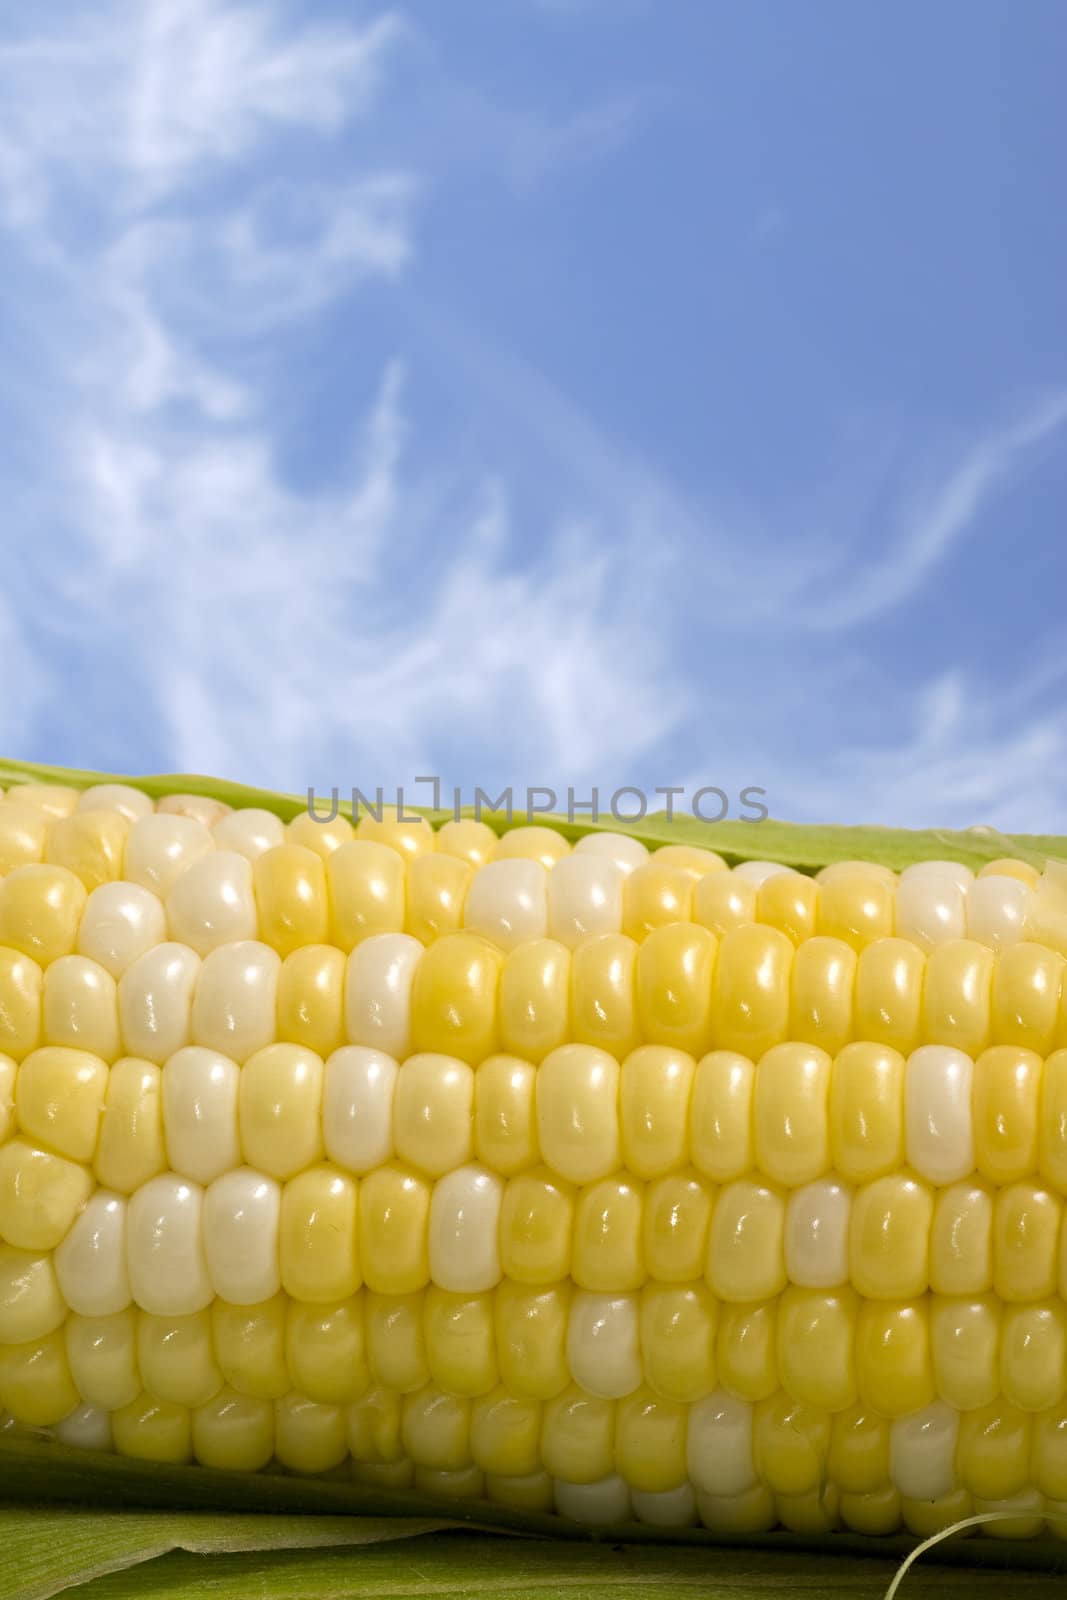 Macro with selective focus on the rows of corn - blue sky with wispy clouds space good for copy.